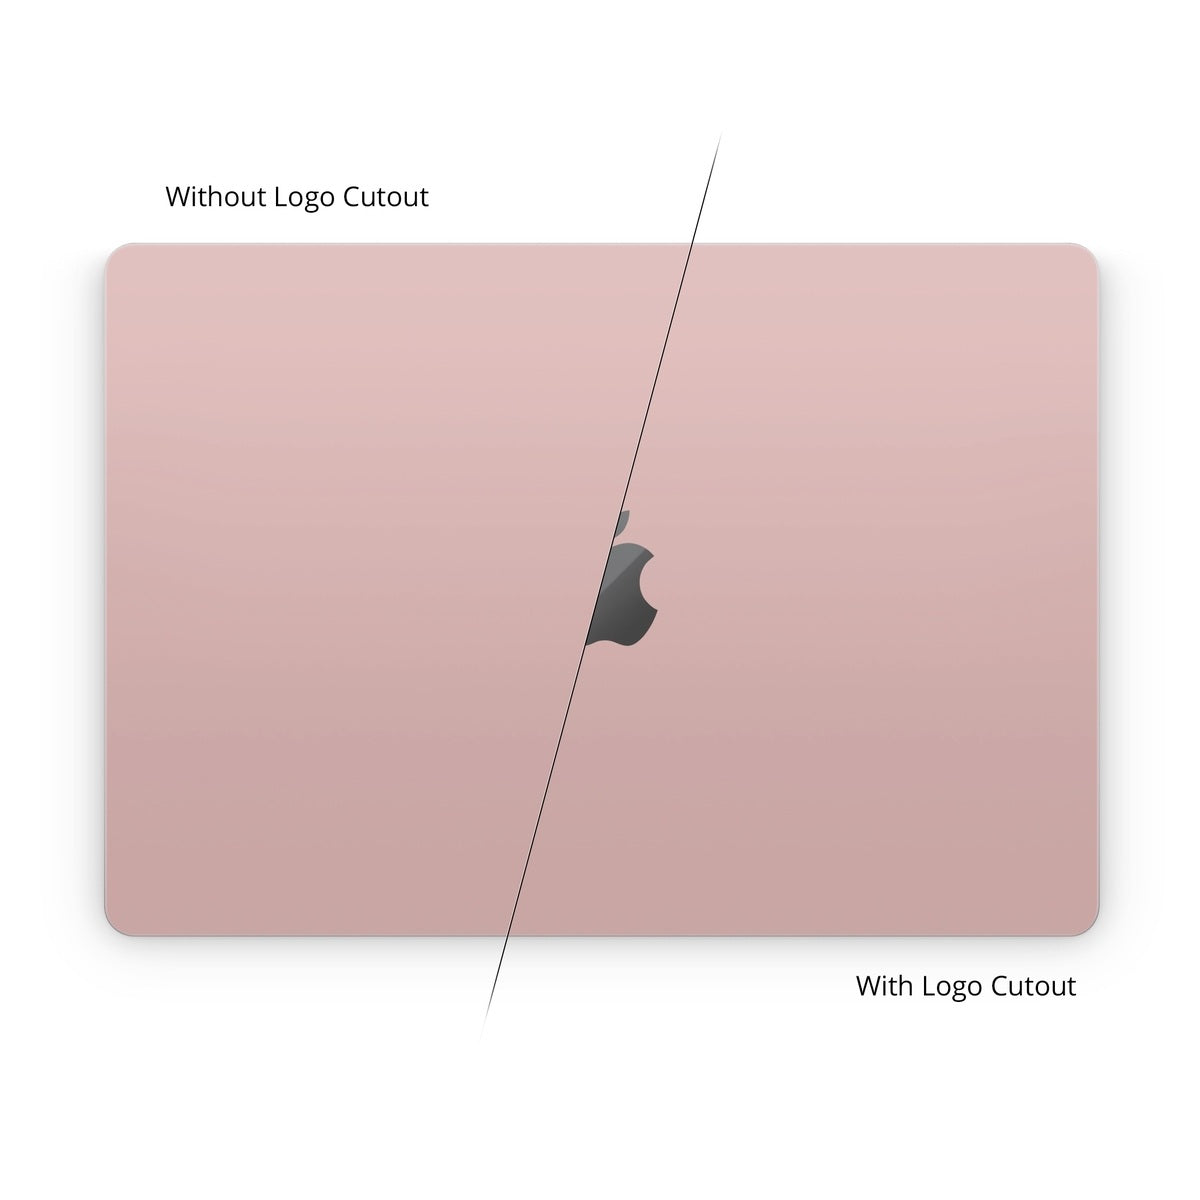 Solid State Faded Rose - Apple MacBook Skin